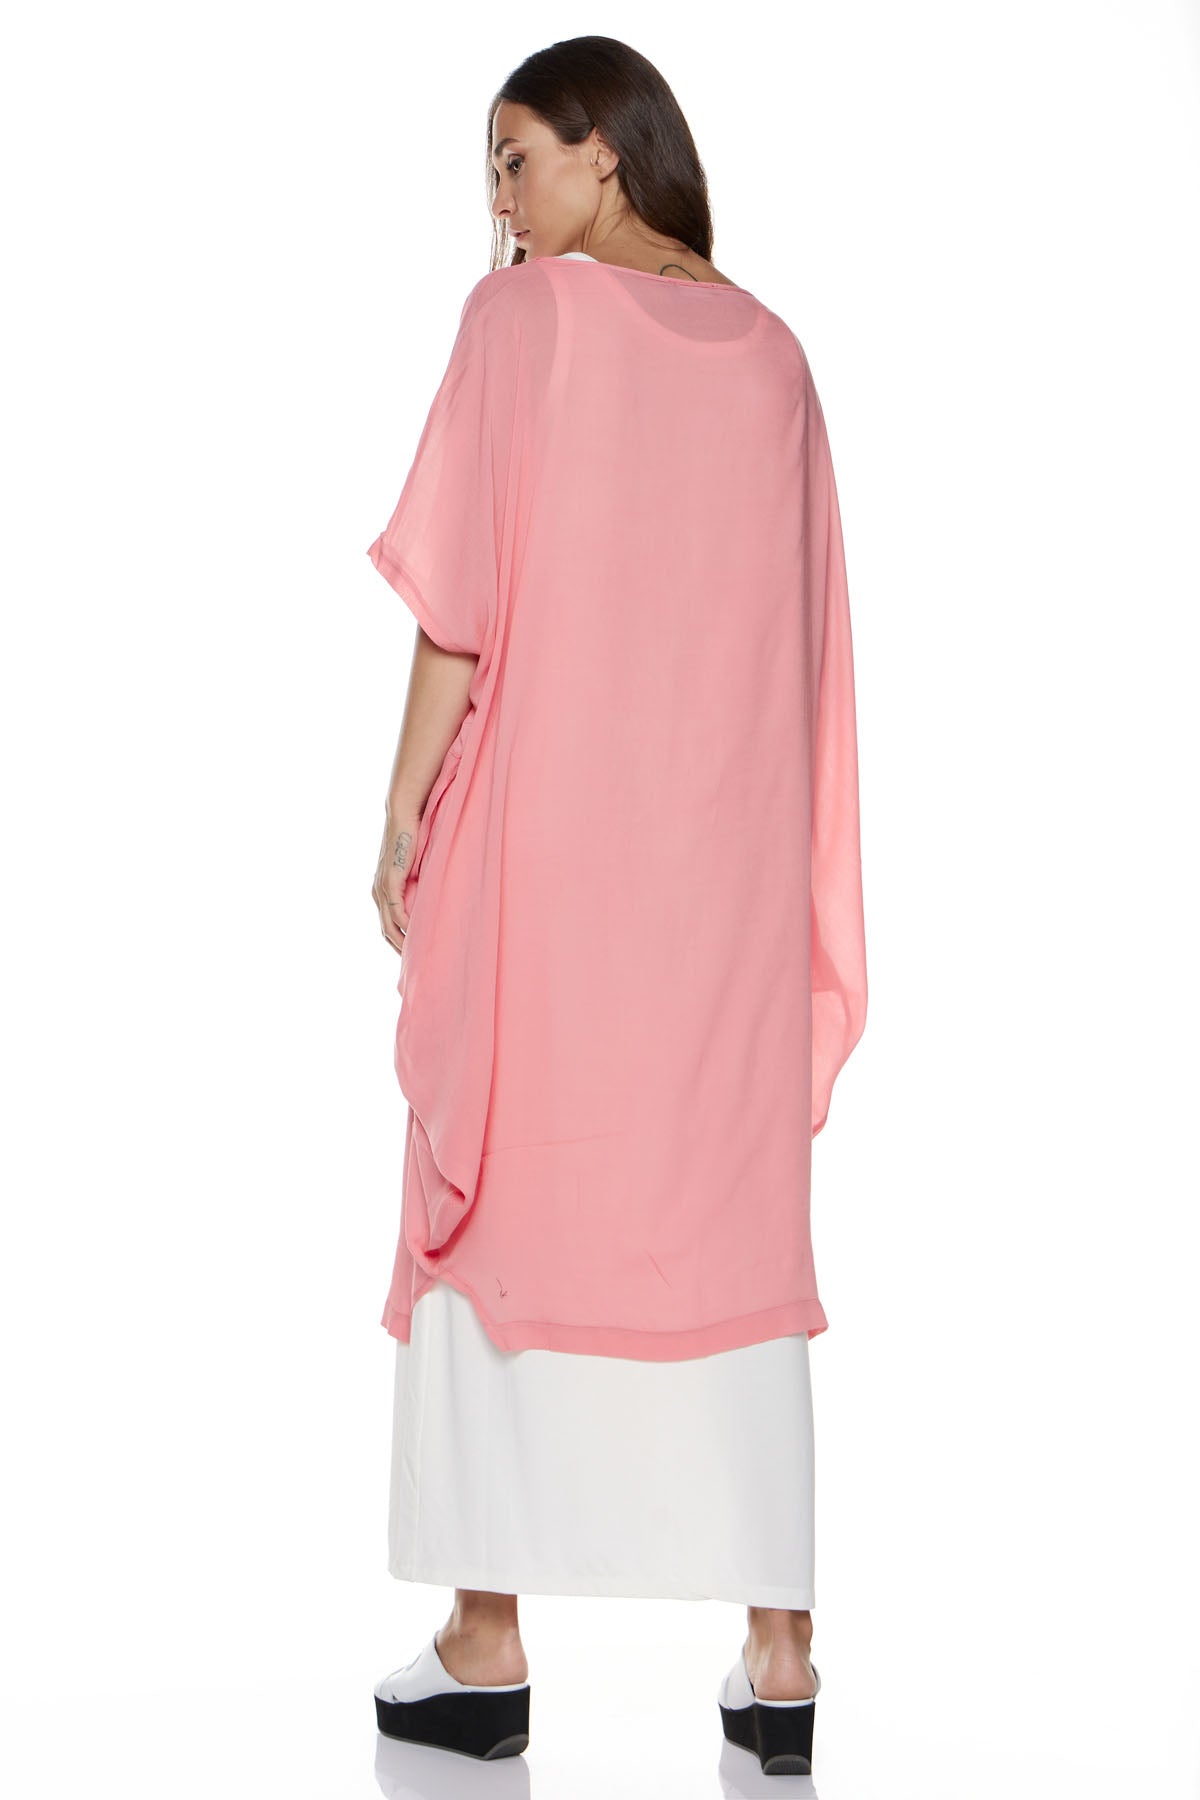 Chic & Simple Combination Dress Circle & Dress (Basics) Fationa - Pink with White